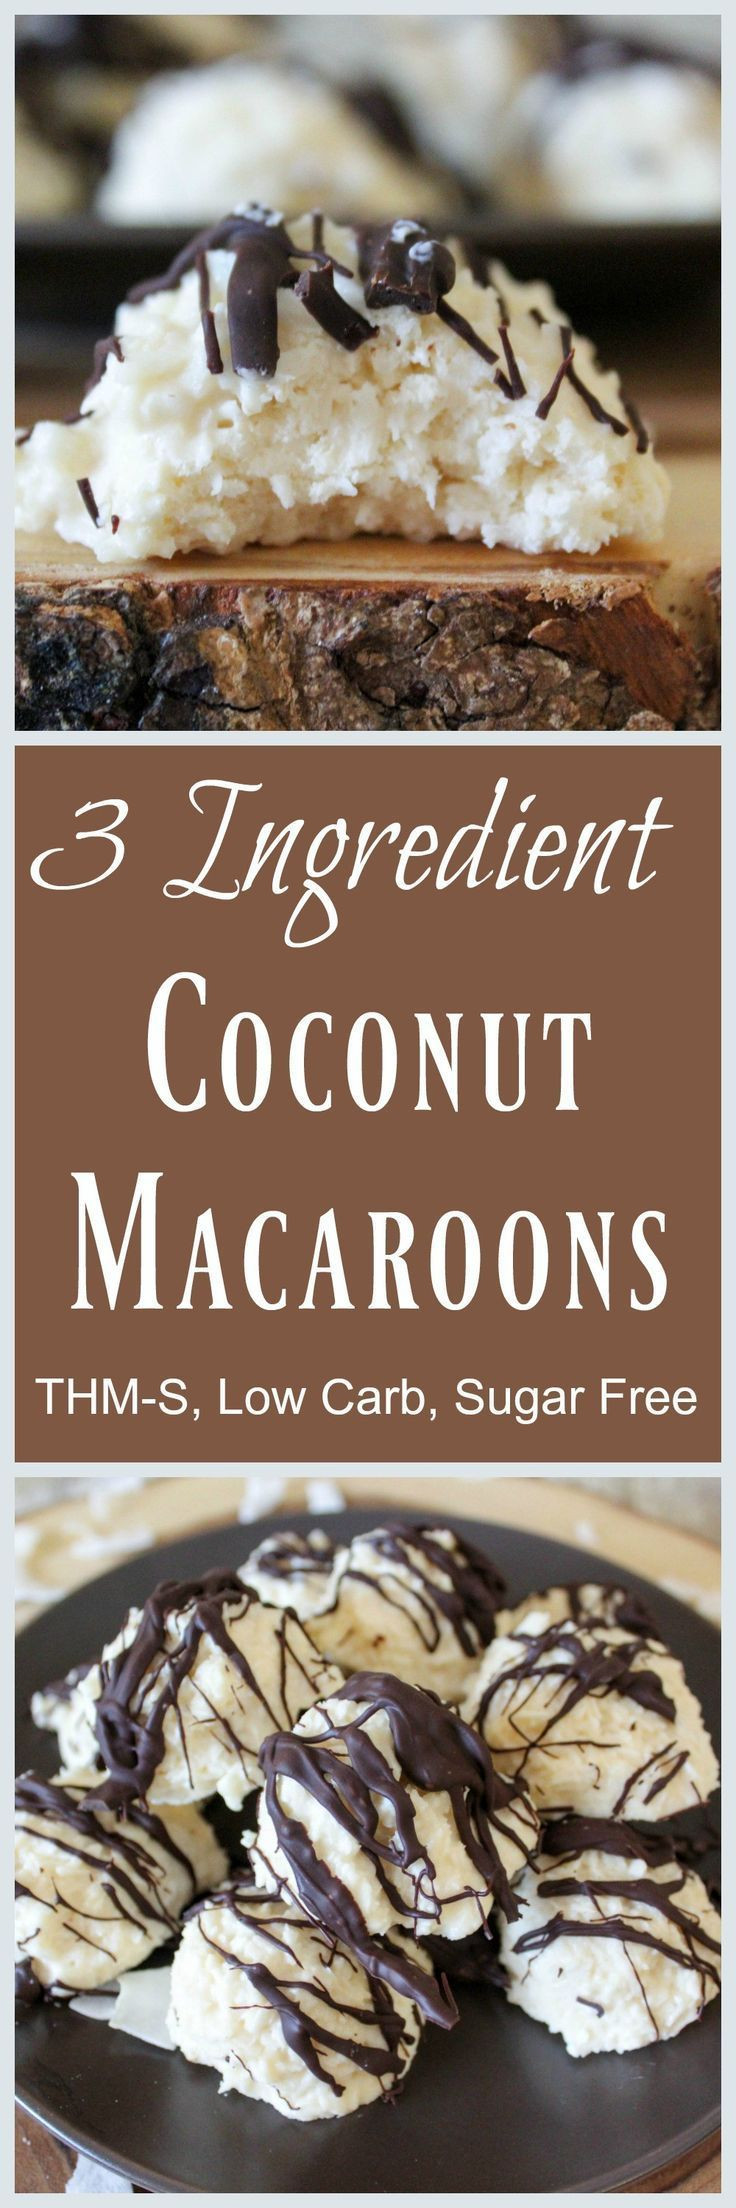 3 Ingredient Low Carb Recipes
 2332 best images about LOW CARB Sugar Free Mom on Pinterest